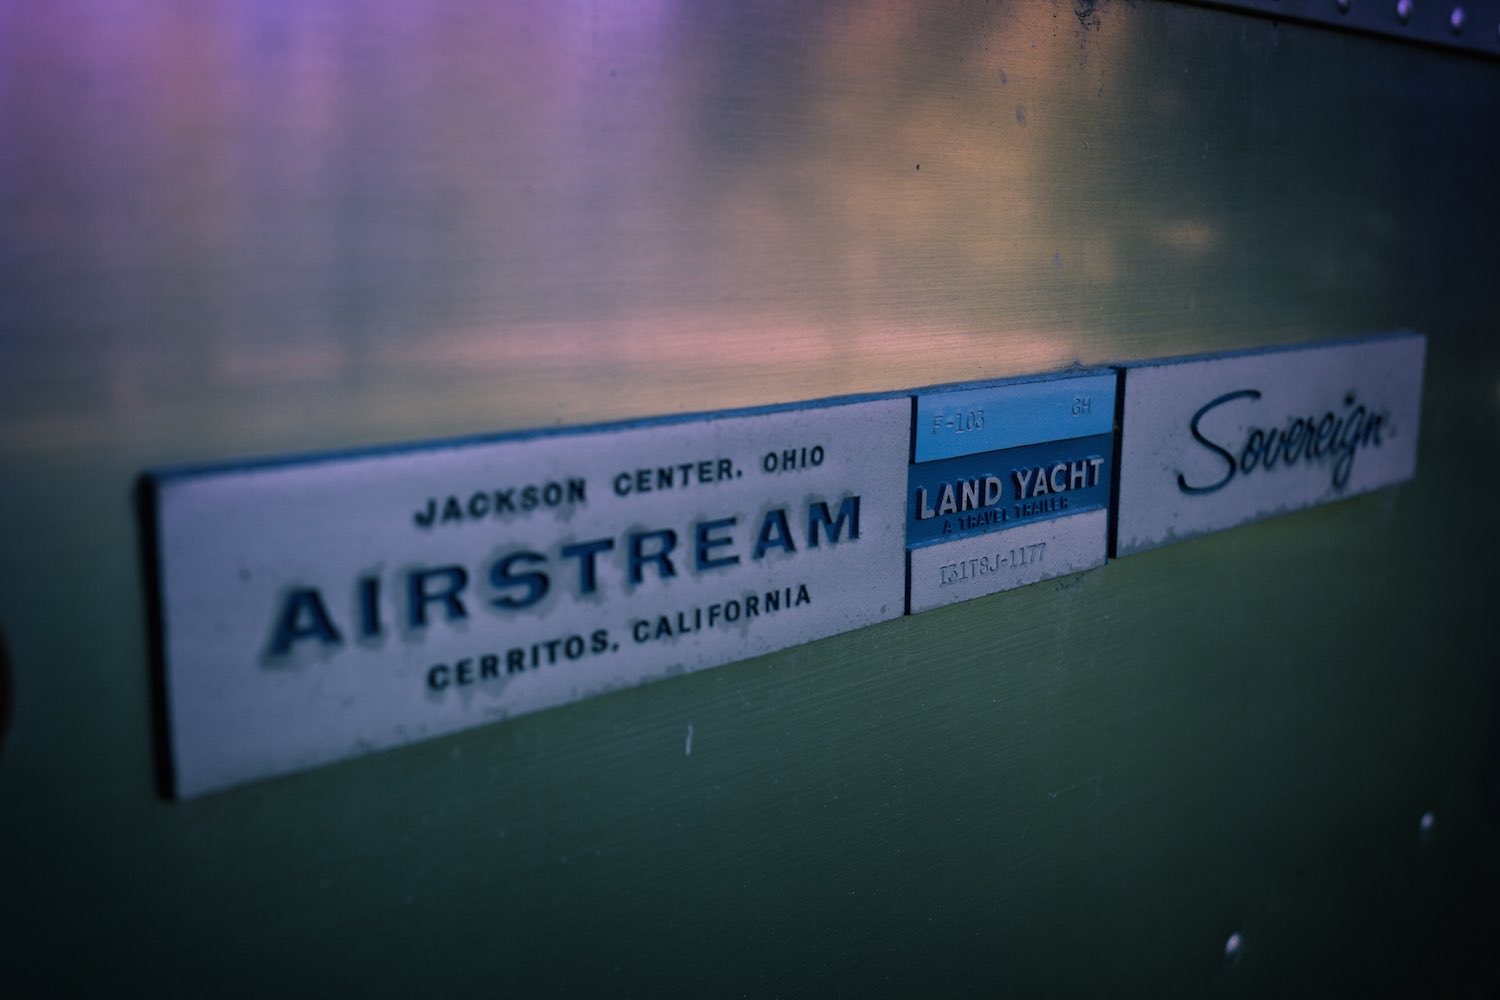 A side view of our Airstream International Sovereign Land Yacht emblem.